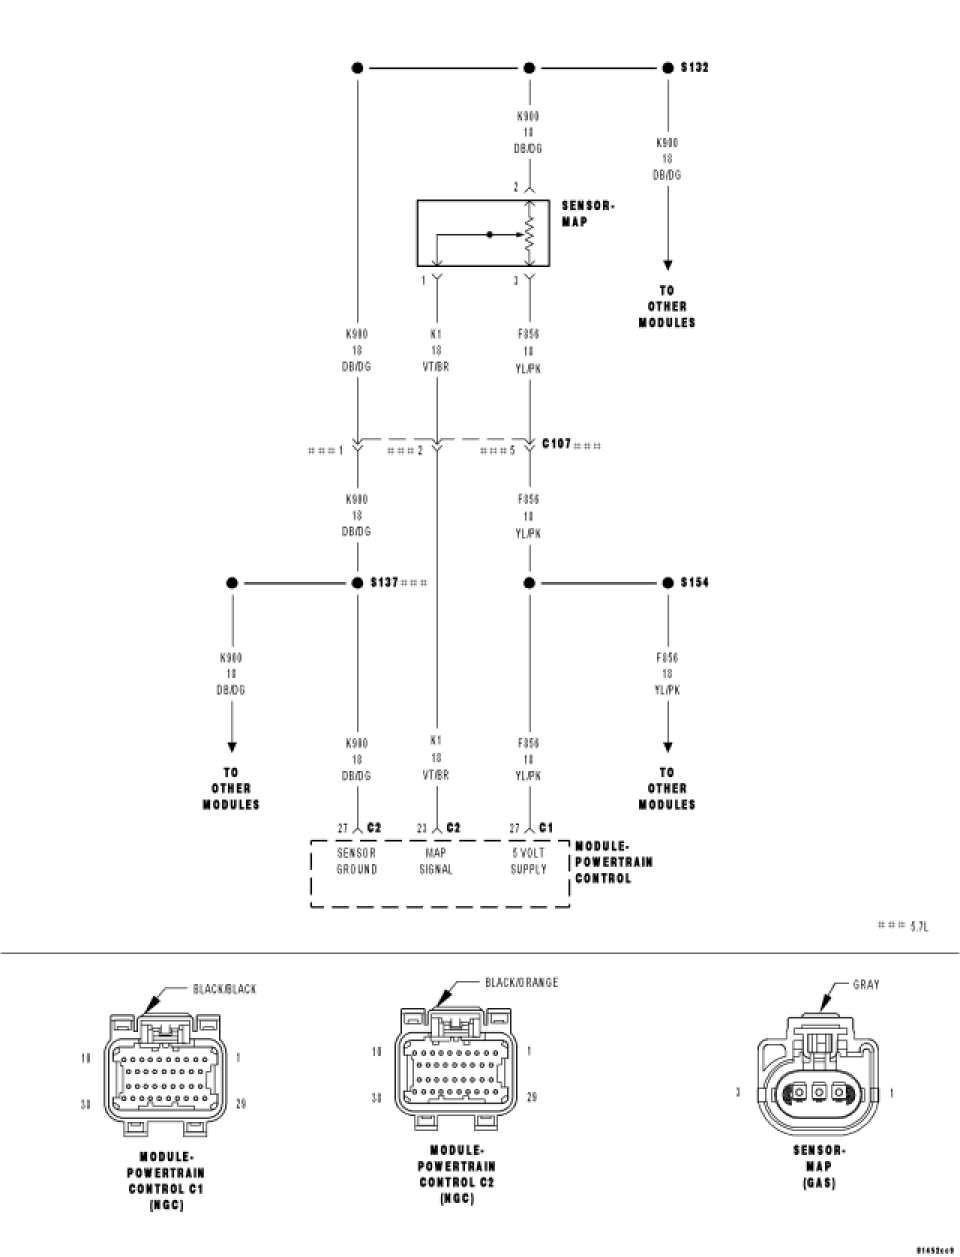 Starter Circuit Wiring Diagram for 2007 Dodge Ram Hemi 2007 Dodge Ram 1500 Hemi 5 7 with Dtc P0107 I Ve Already Replaced the Map Sensor and the Code Of Starter Circuit Wiring Diagram for 2007 Dodge Ram Hemi